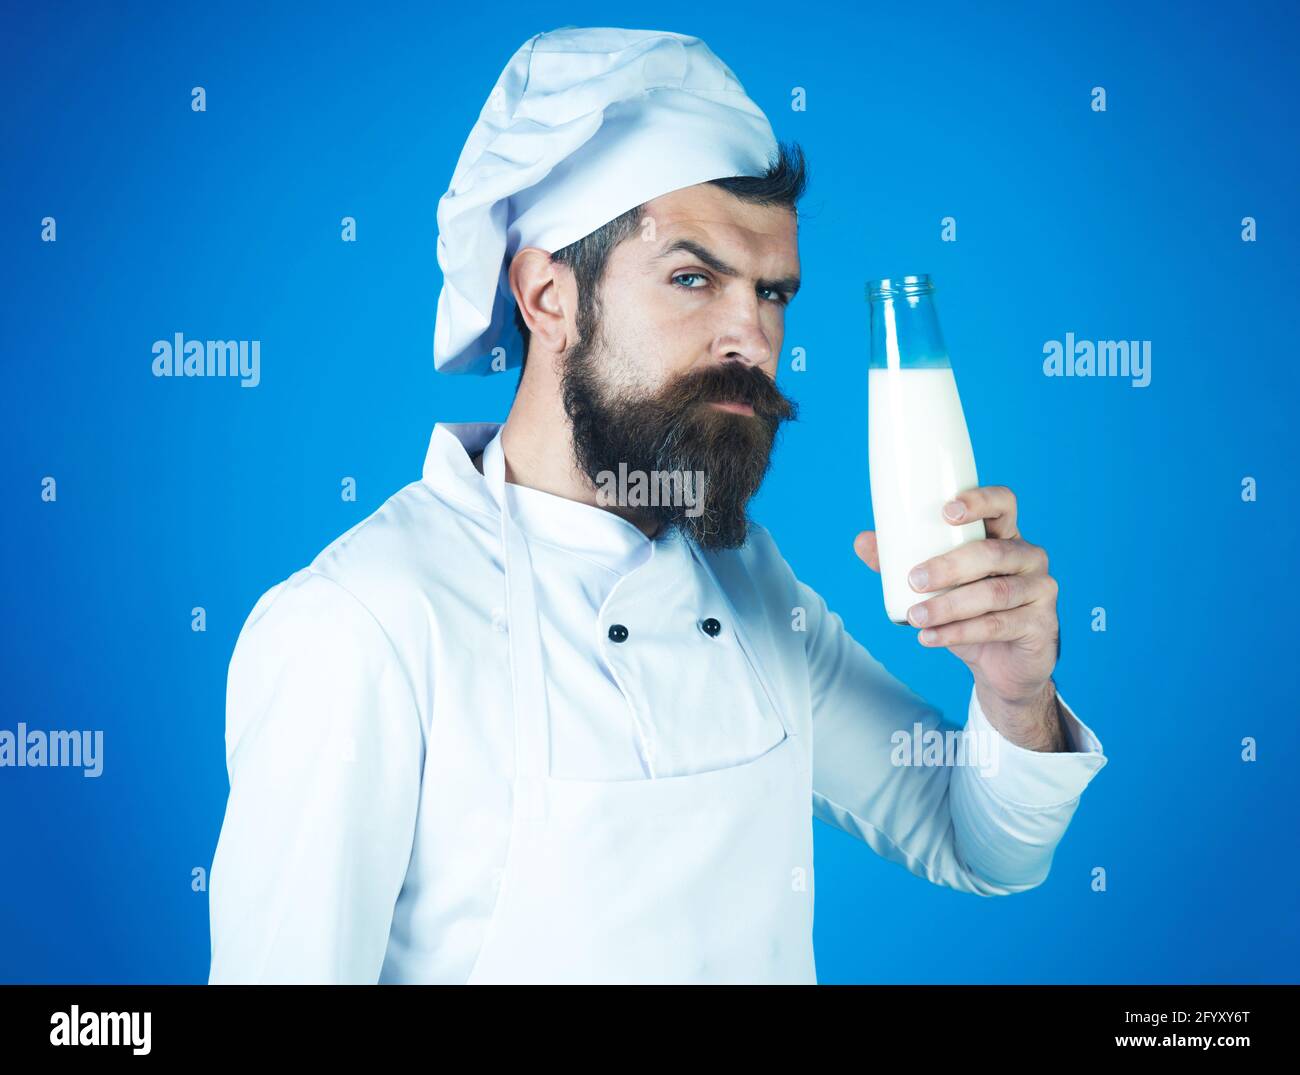 Bearded chef man in uniform with bottle of milk. Drinks, dairy farmer products, diet. Stock Photo